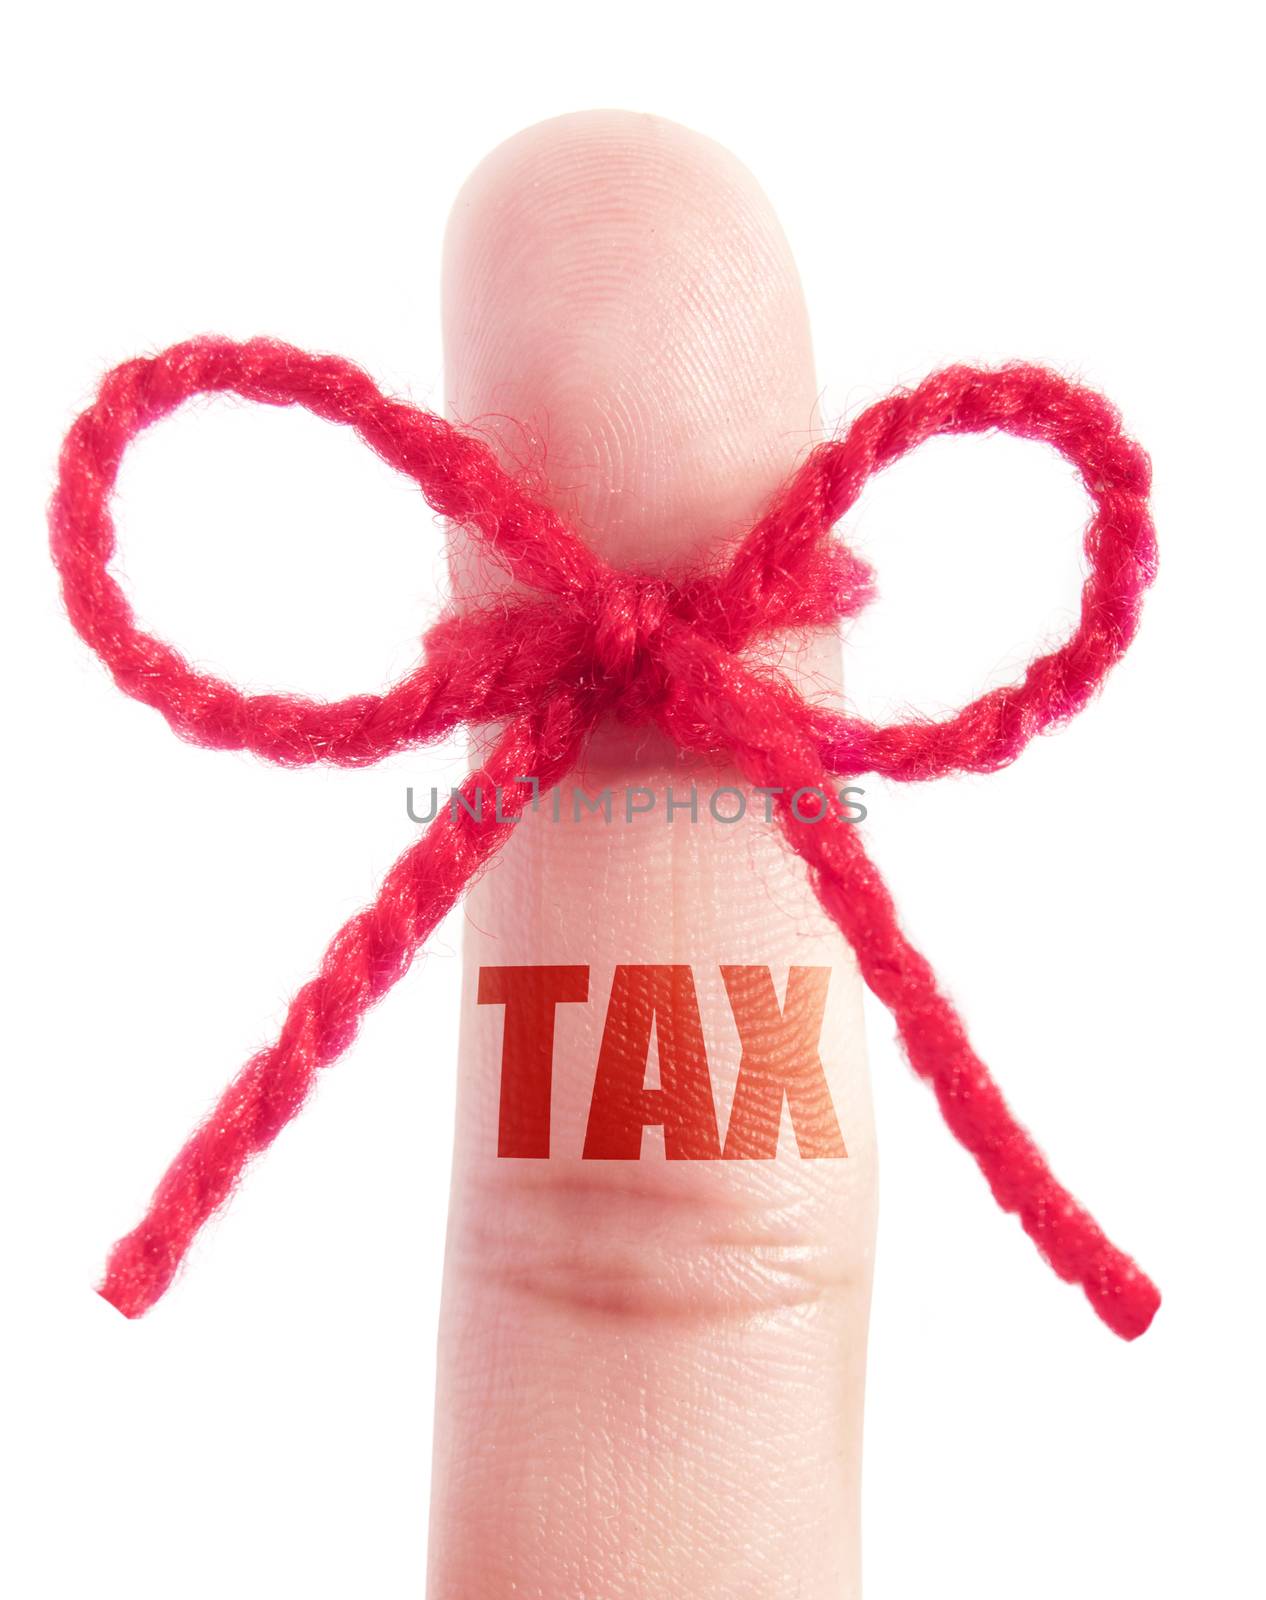 Tax printed on a finger tied with red bow